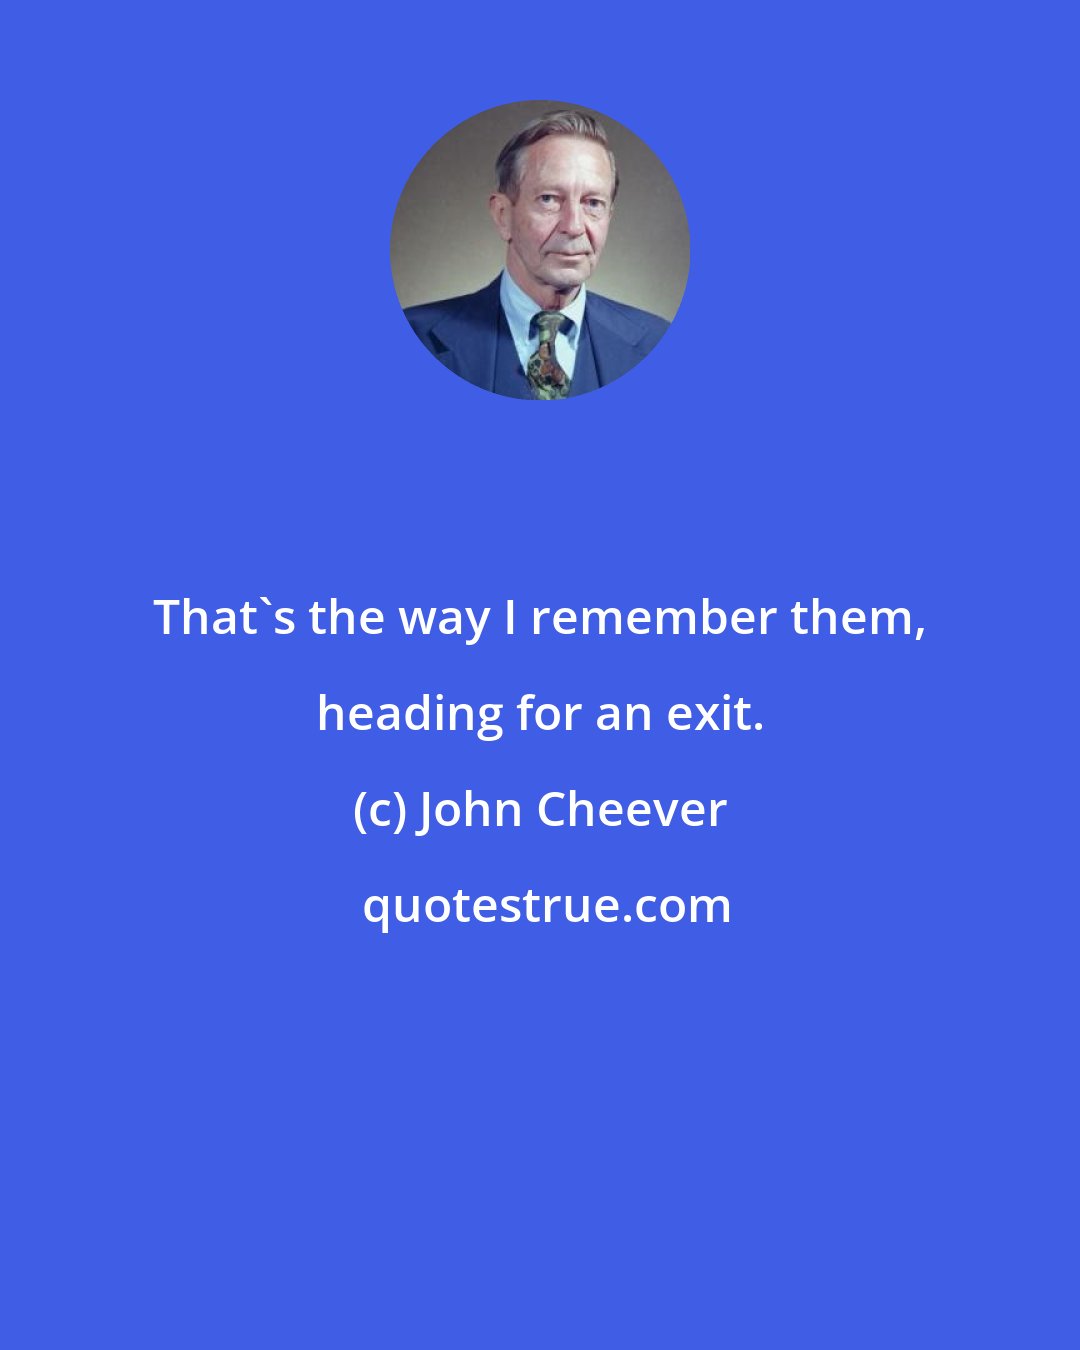 John Cheever: That's the way I remember them, heading for an exit.